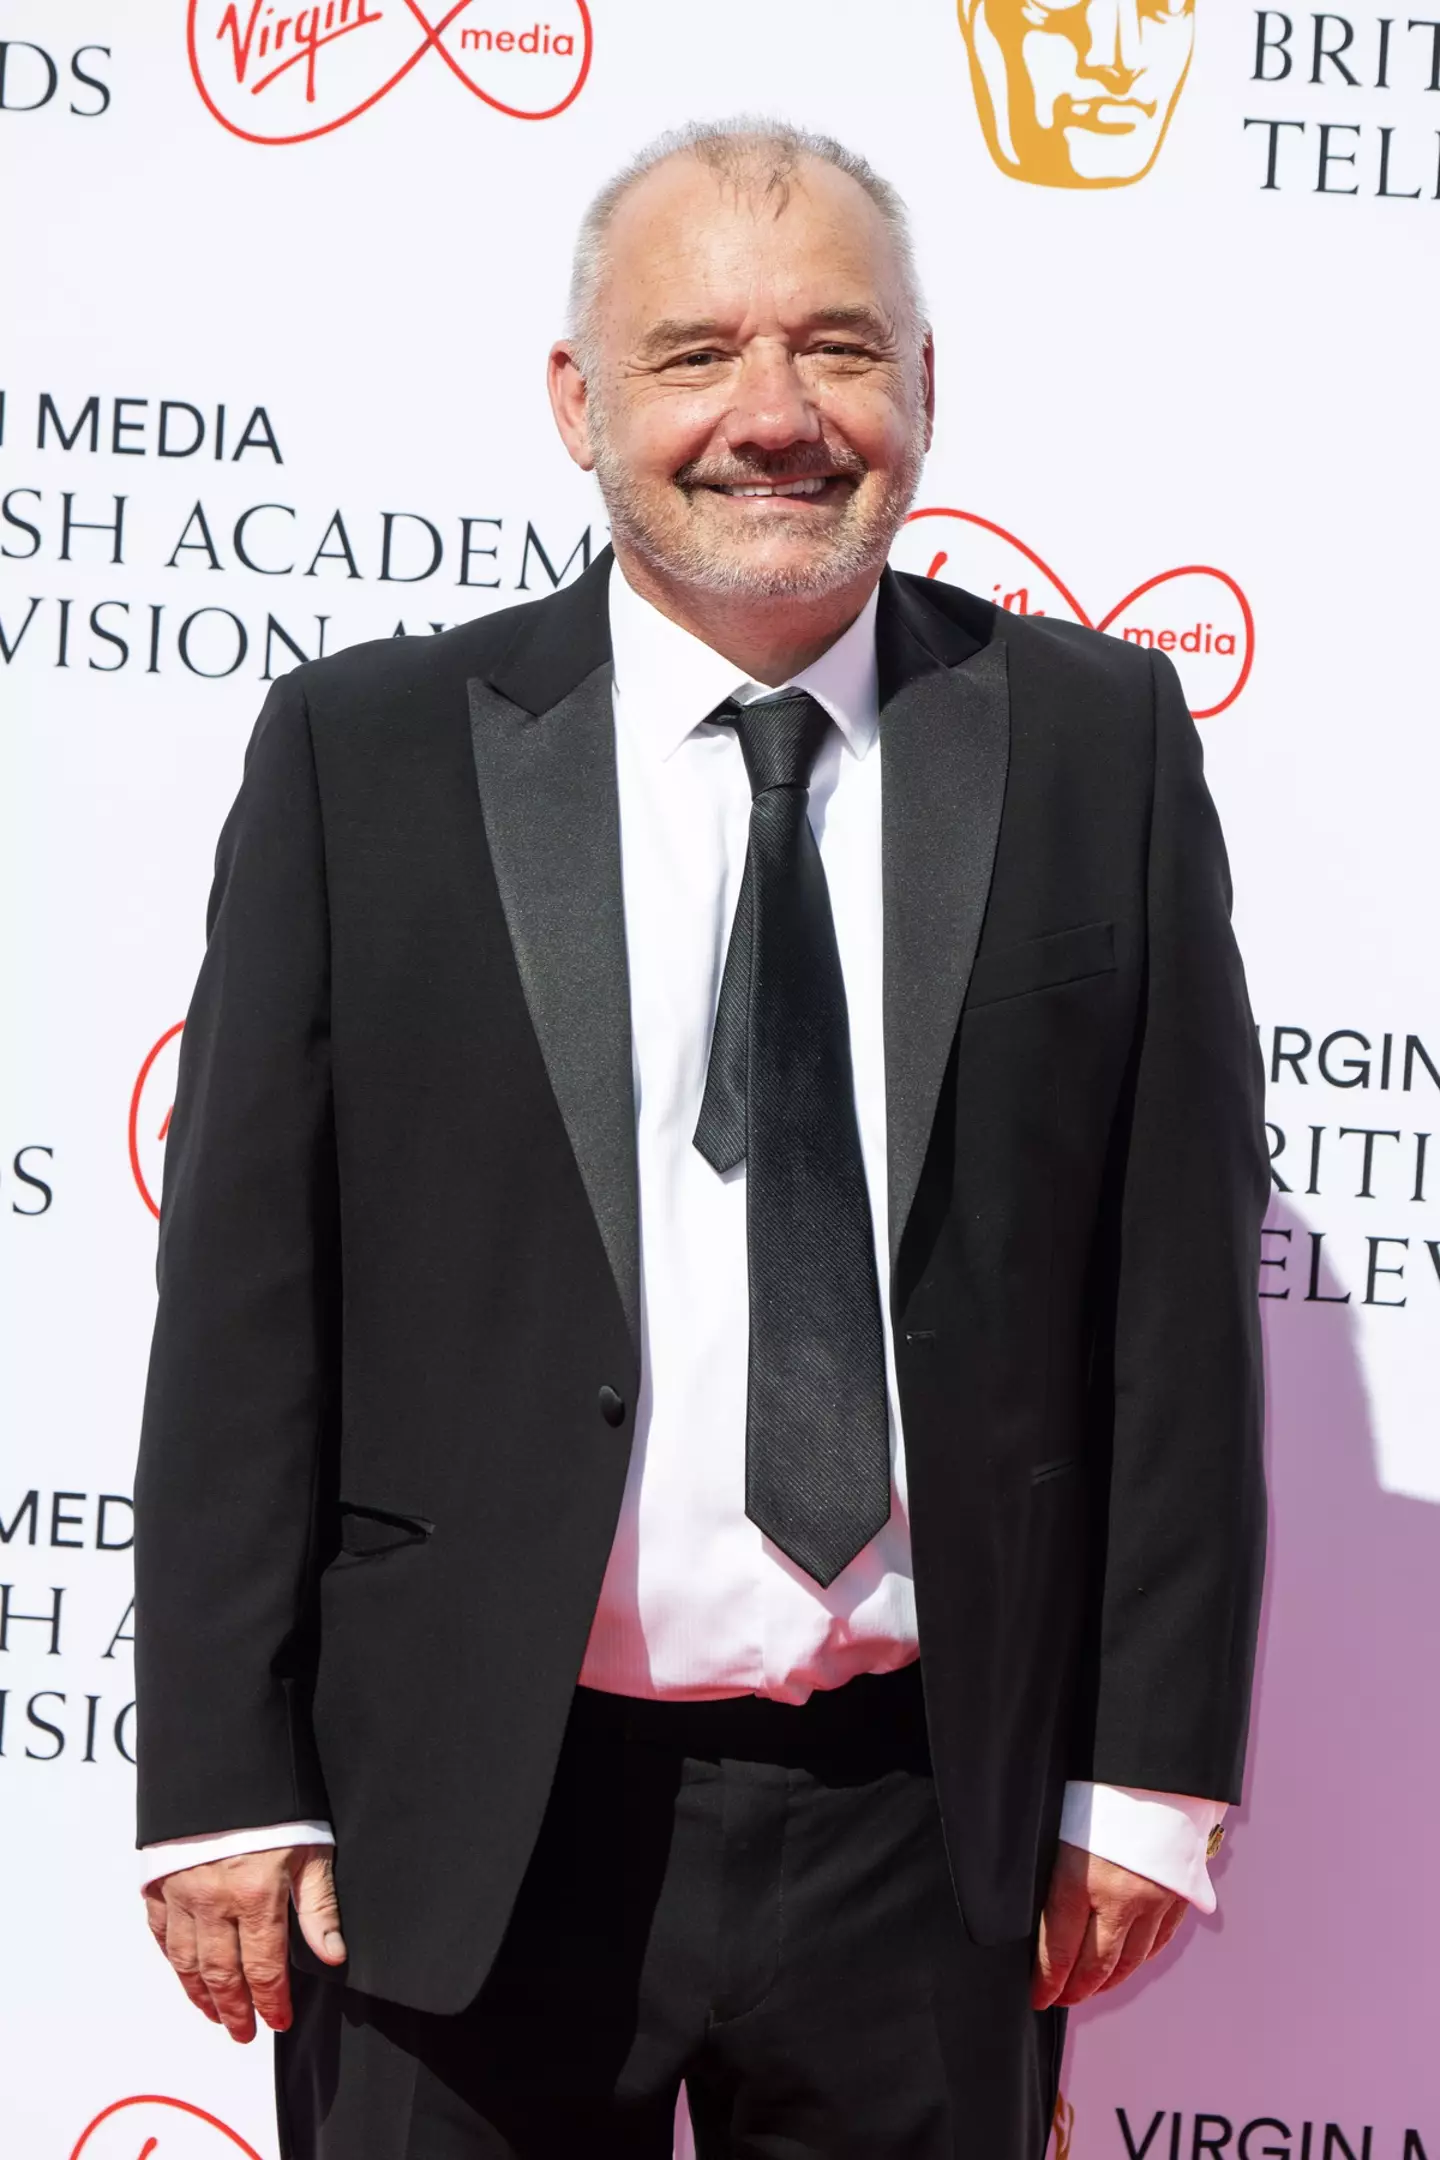 Bob Mortimer spoke about his health on The One Show.